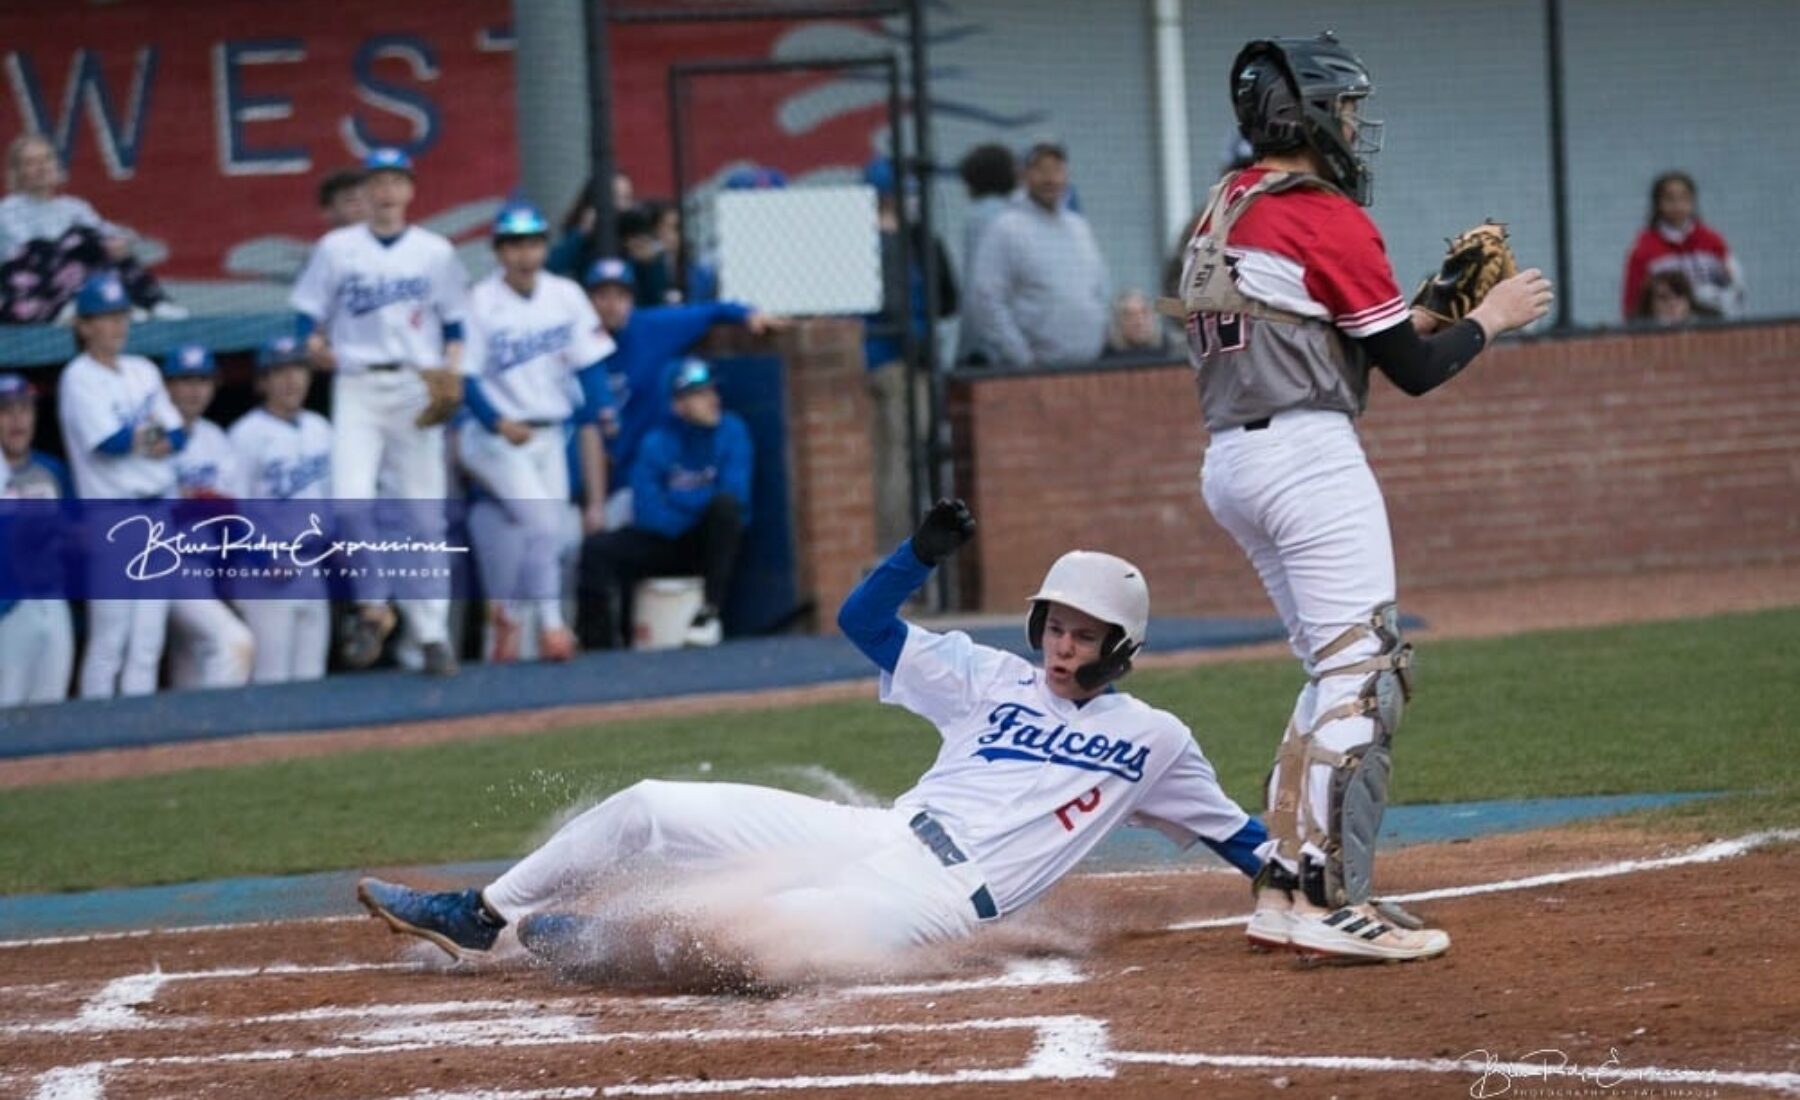 West Henderson Baseball Gets Conference Win Over Pisgah